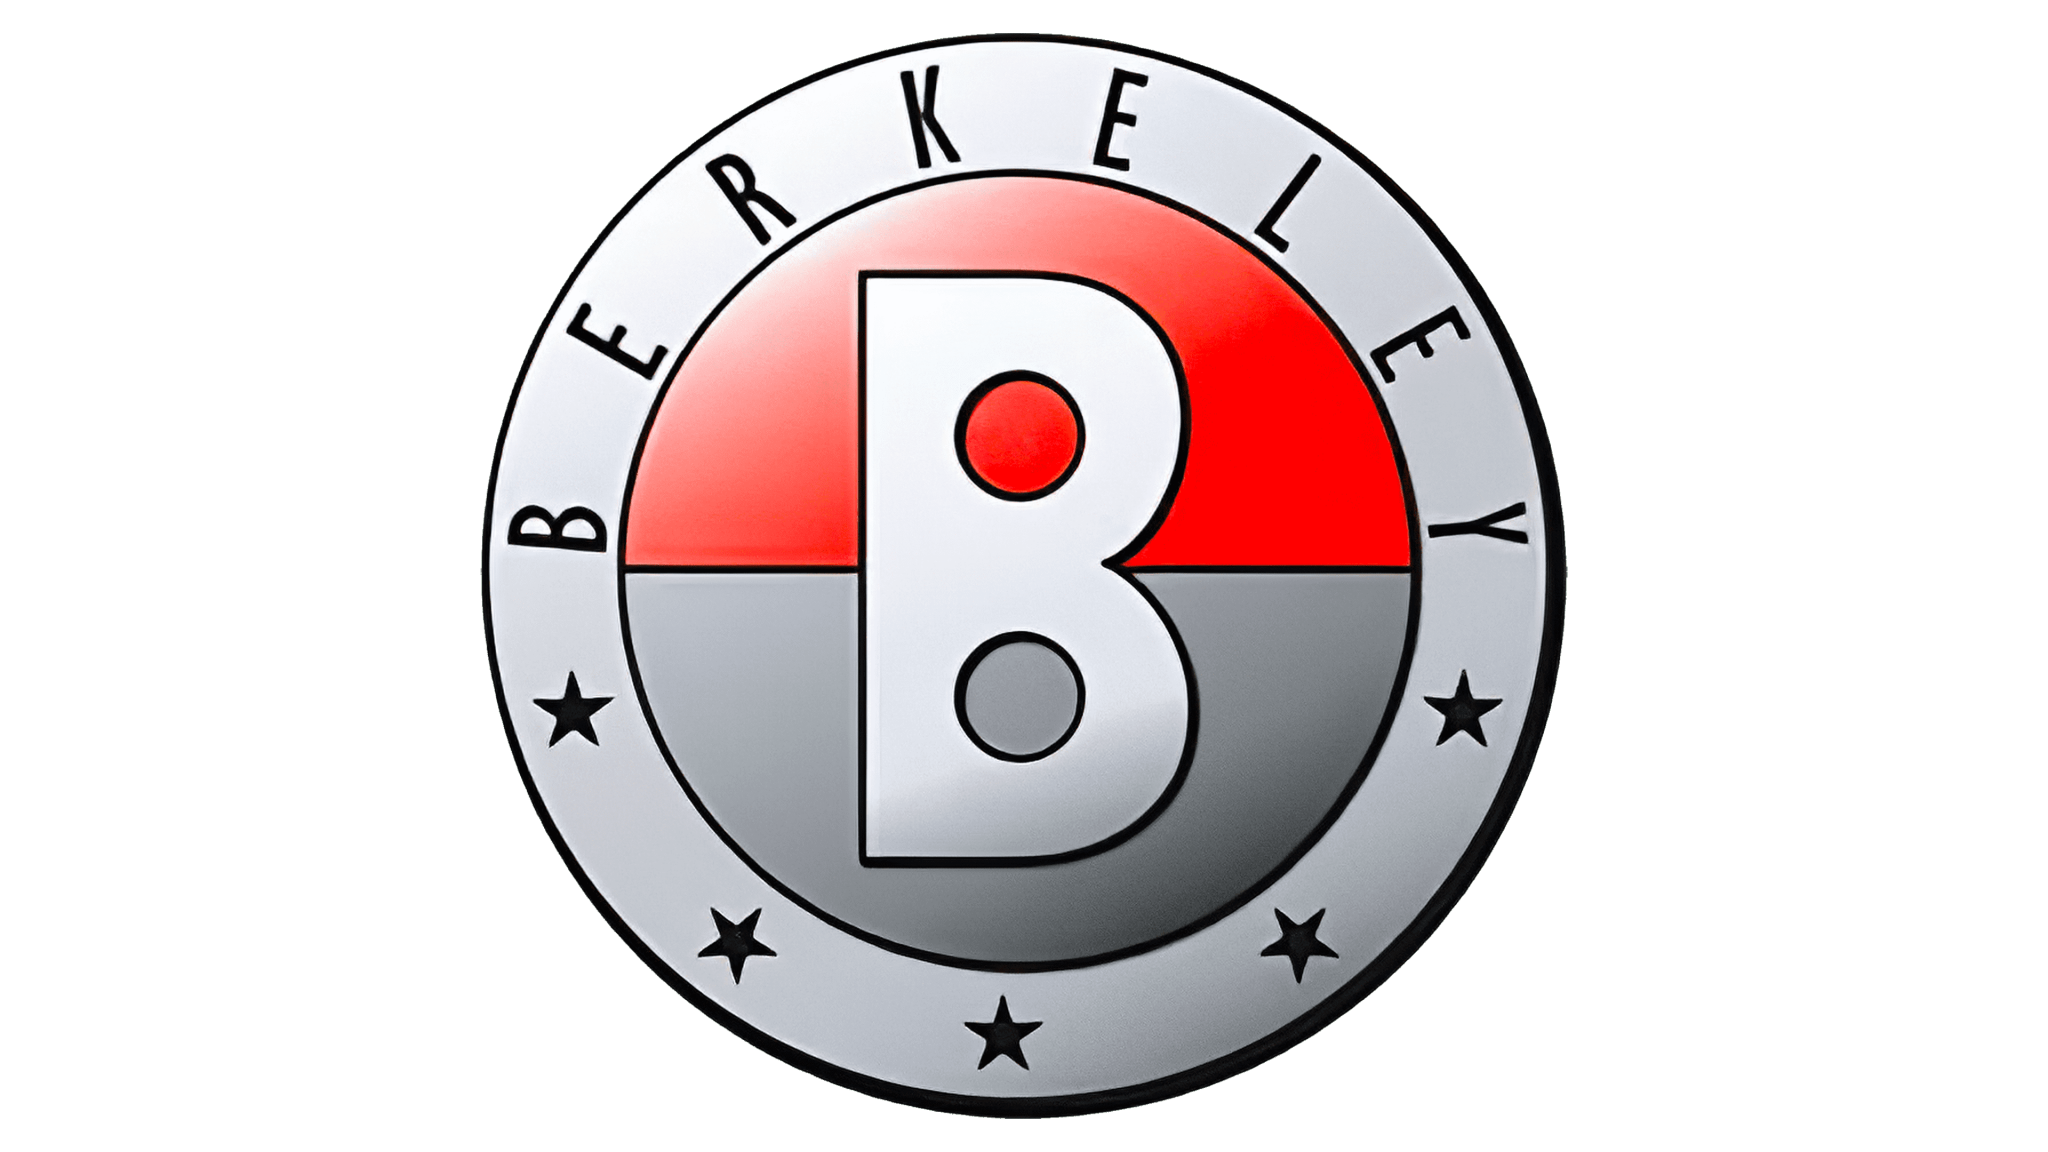 Berkeley Logo and sign, new logo meaning and history, PNG, SVG